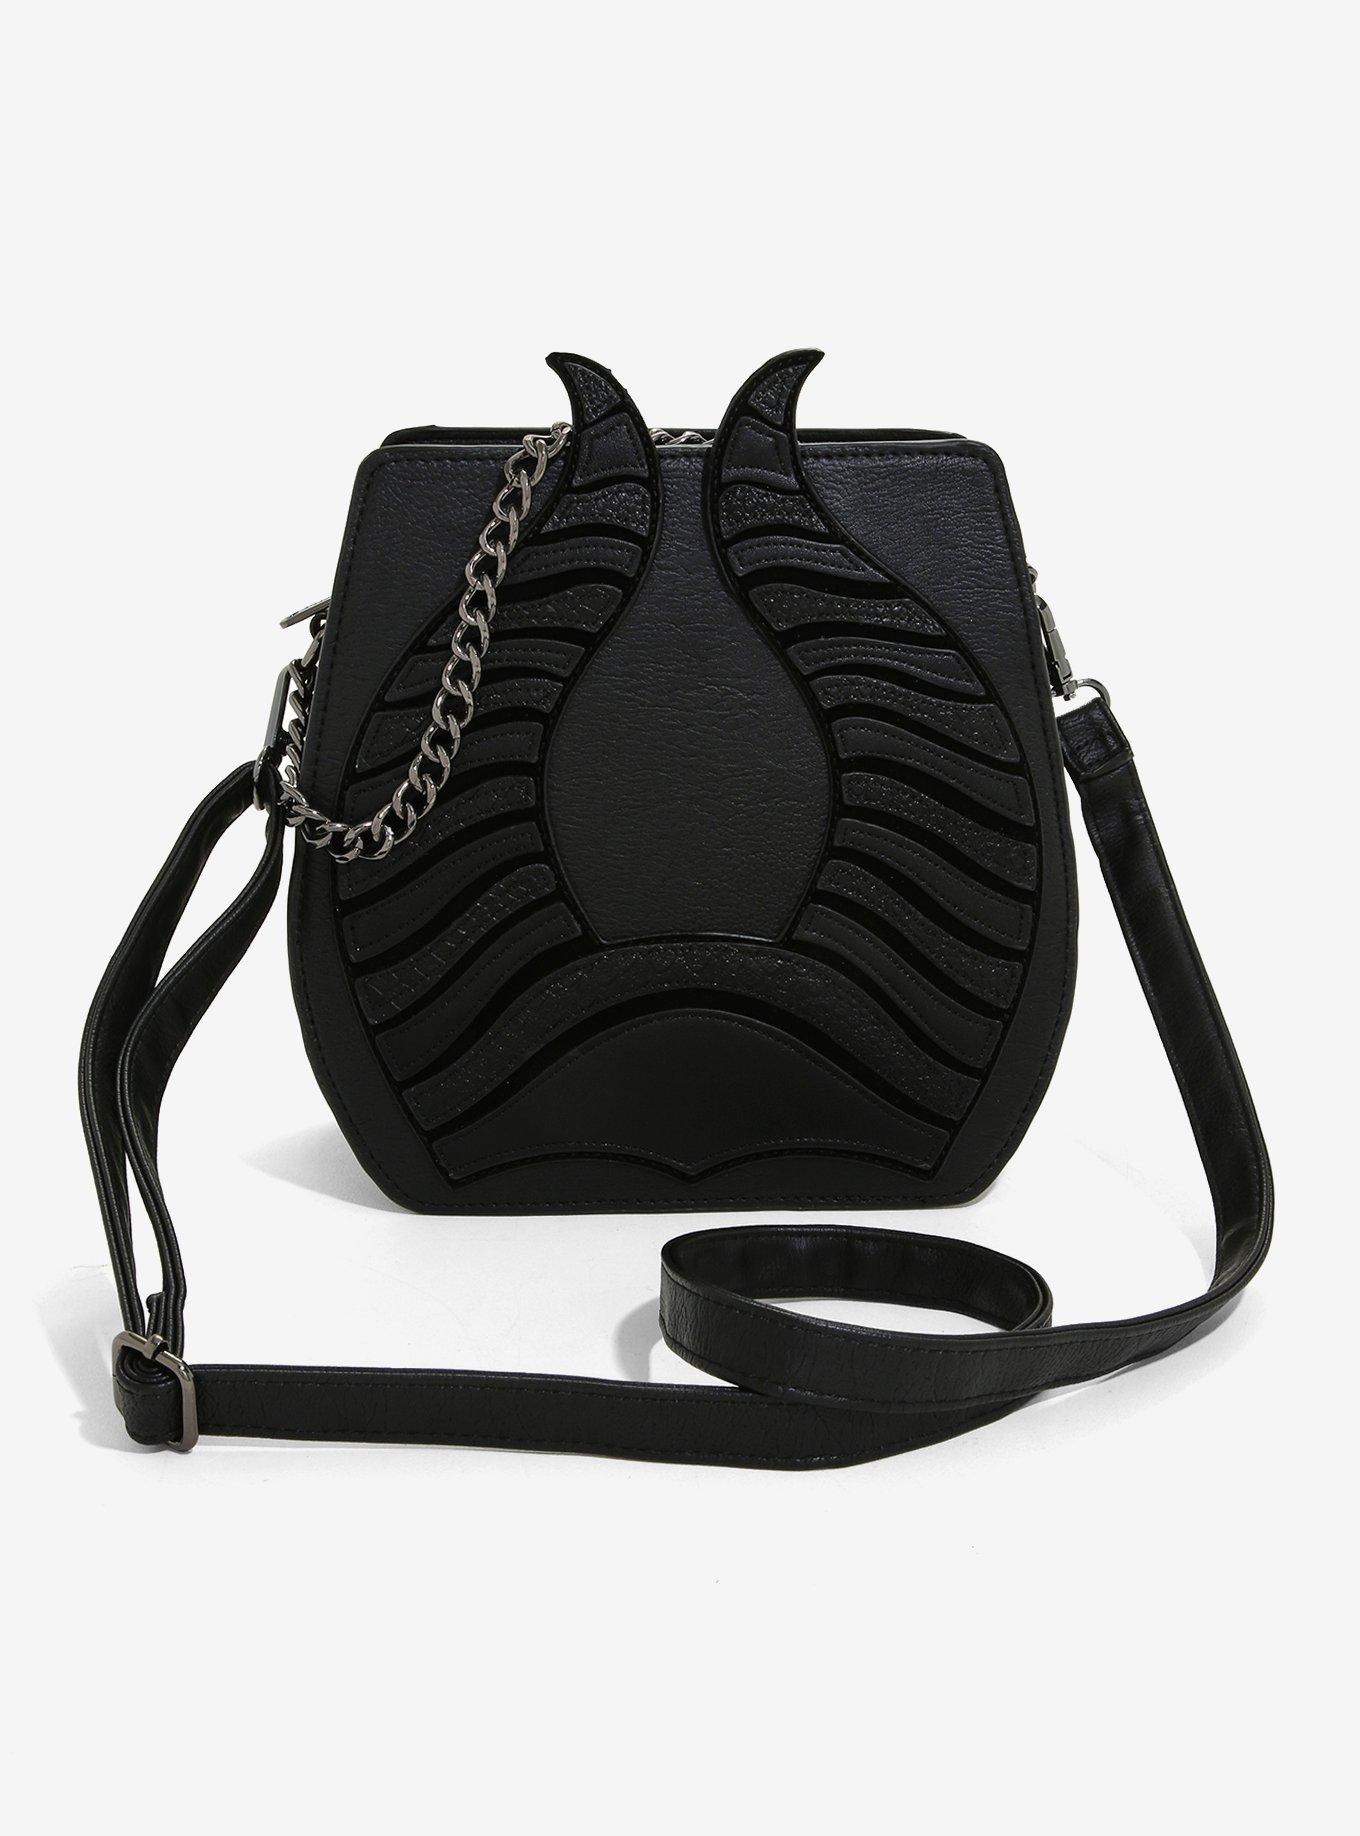 Brand New Maleficent Crossbody for Sale in Bakersfield, CA - OfferUp